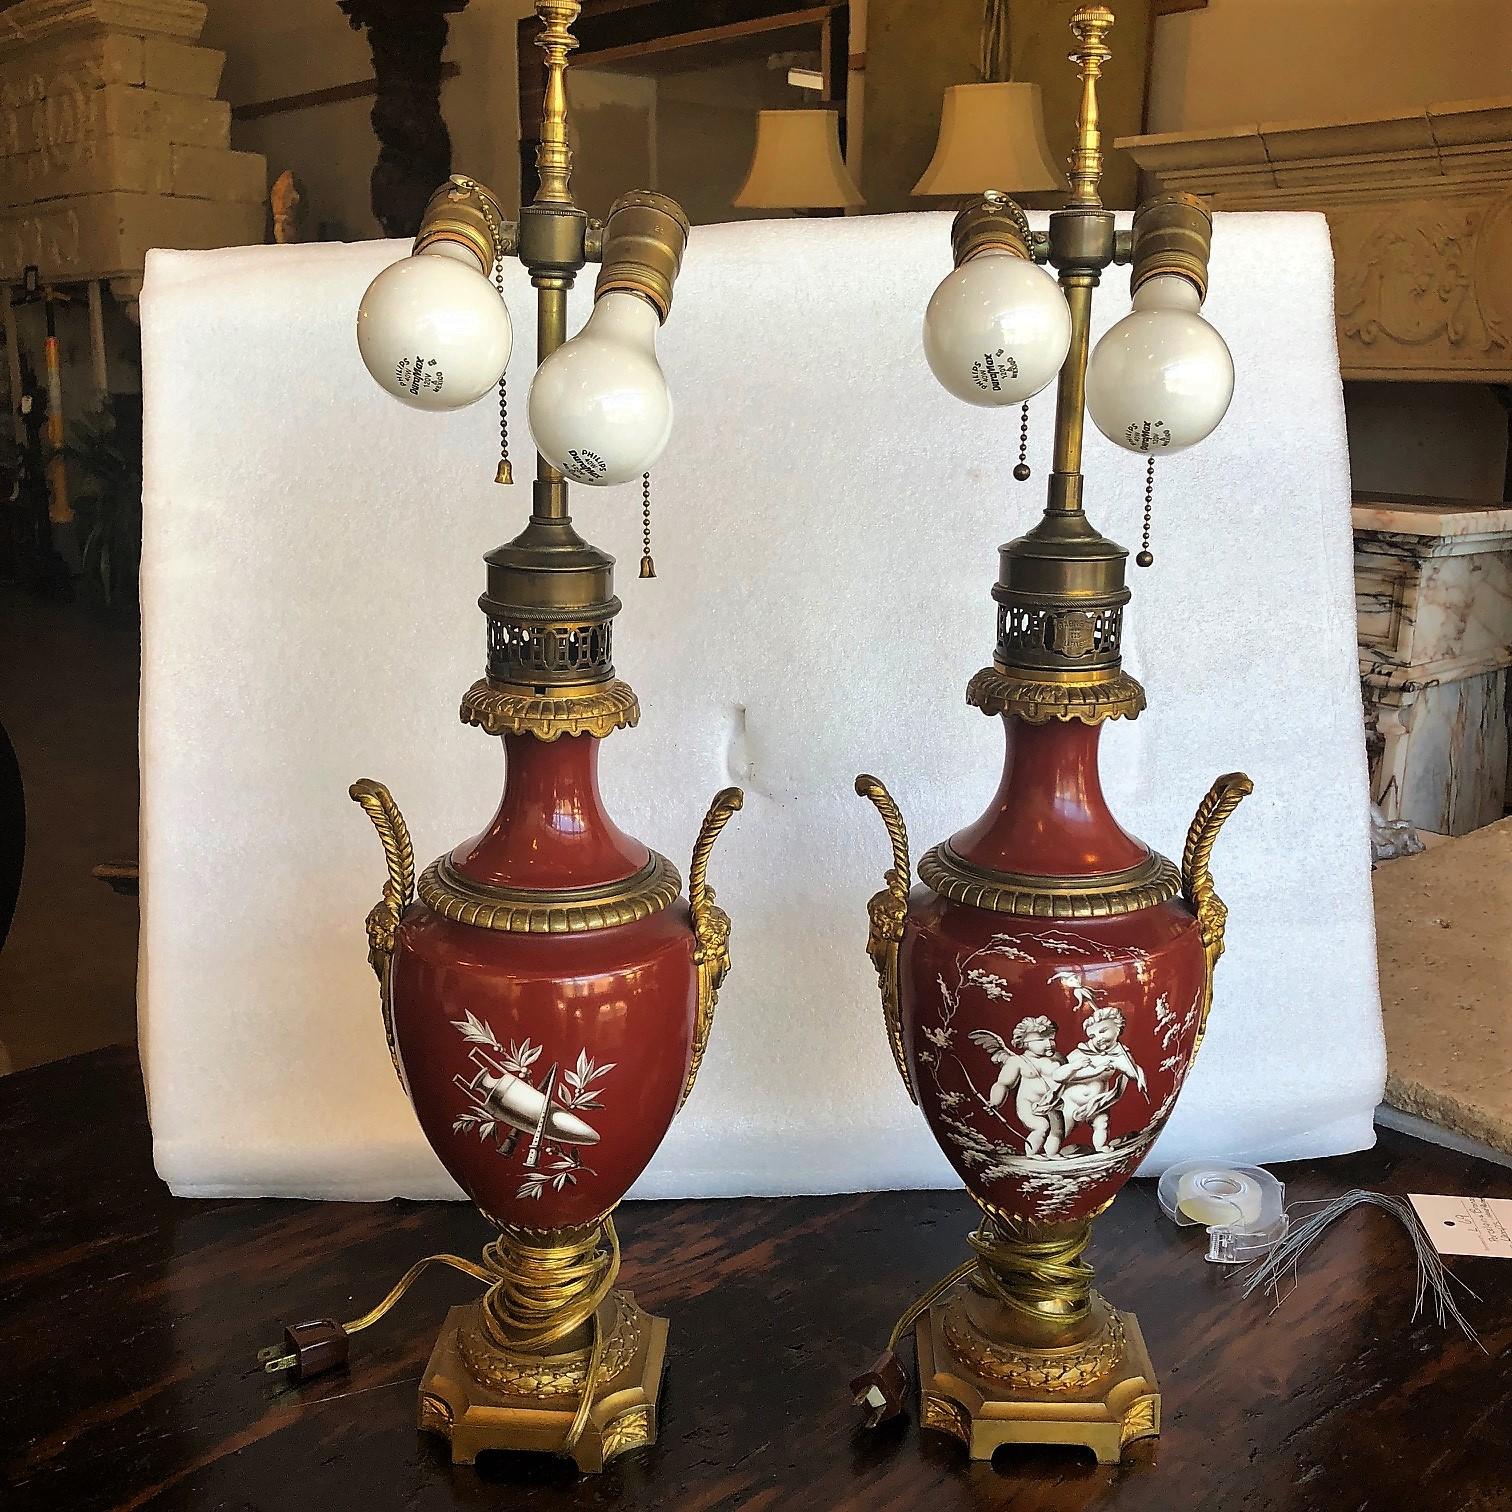 Here we have a pair of French lamps made of beautifully carved bronze and hand-painted porcelain. 

circa 1900

Origin: France

Measurements:
7